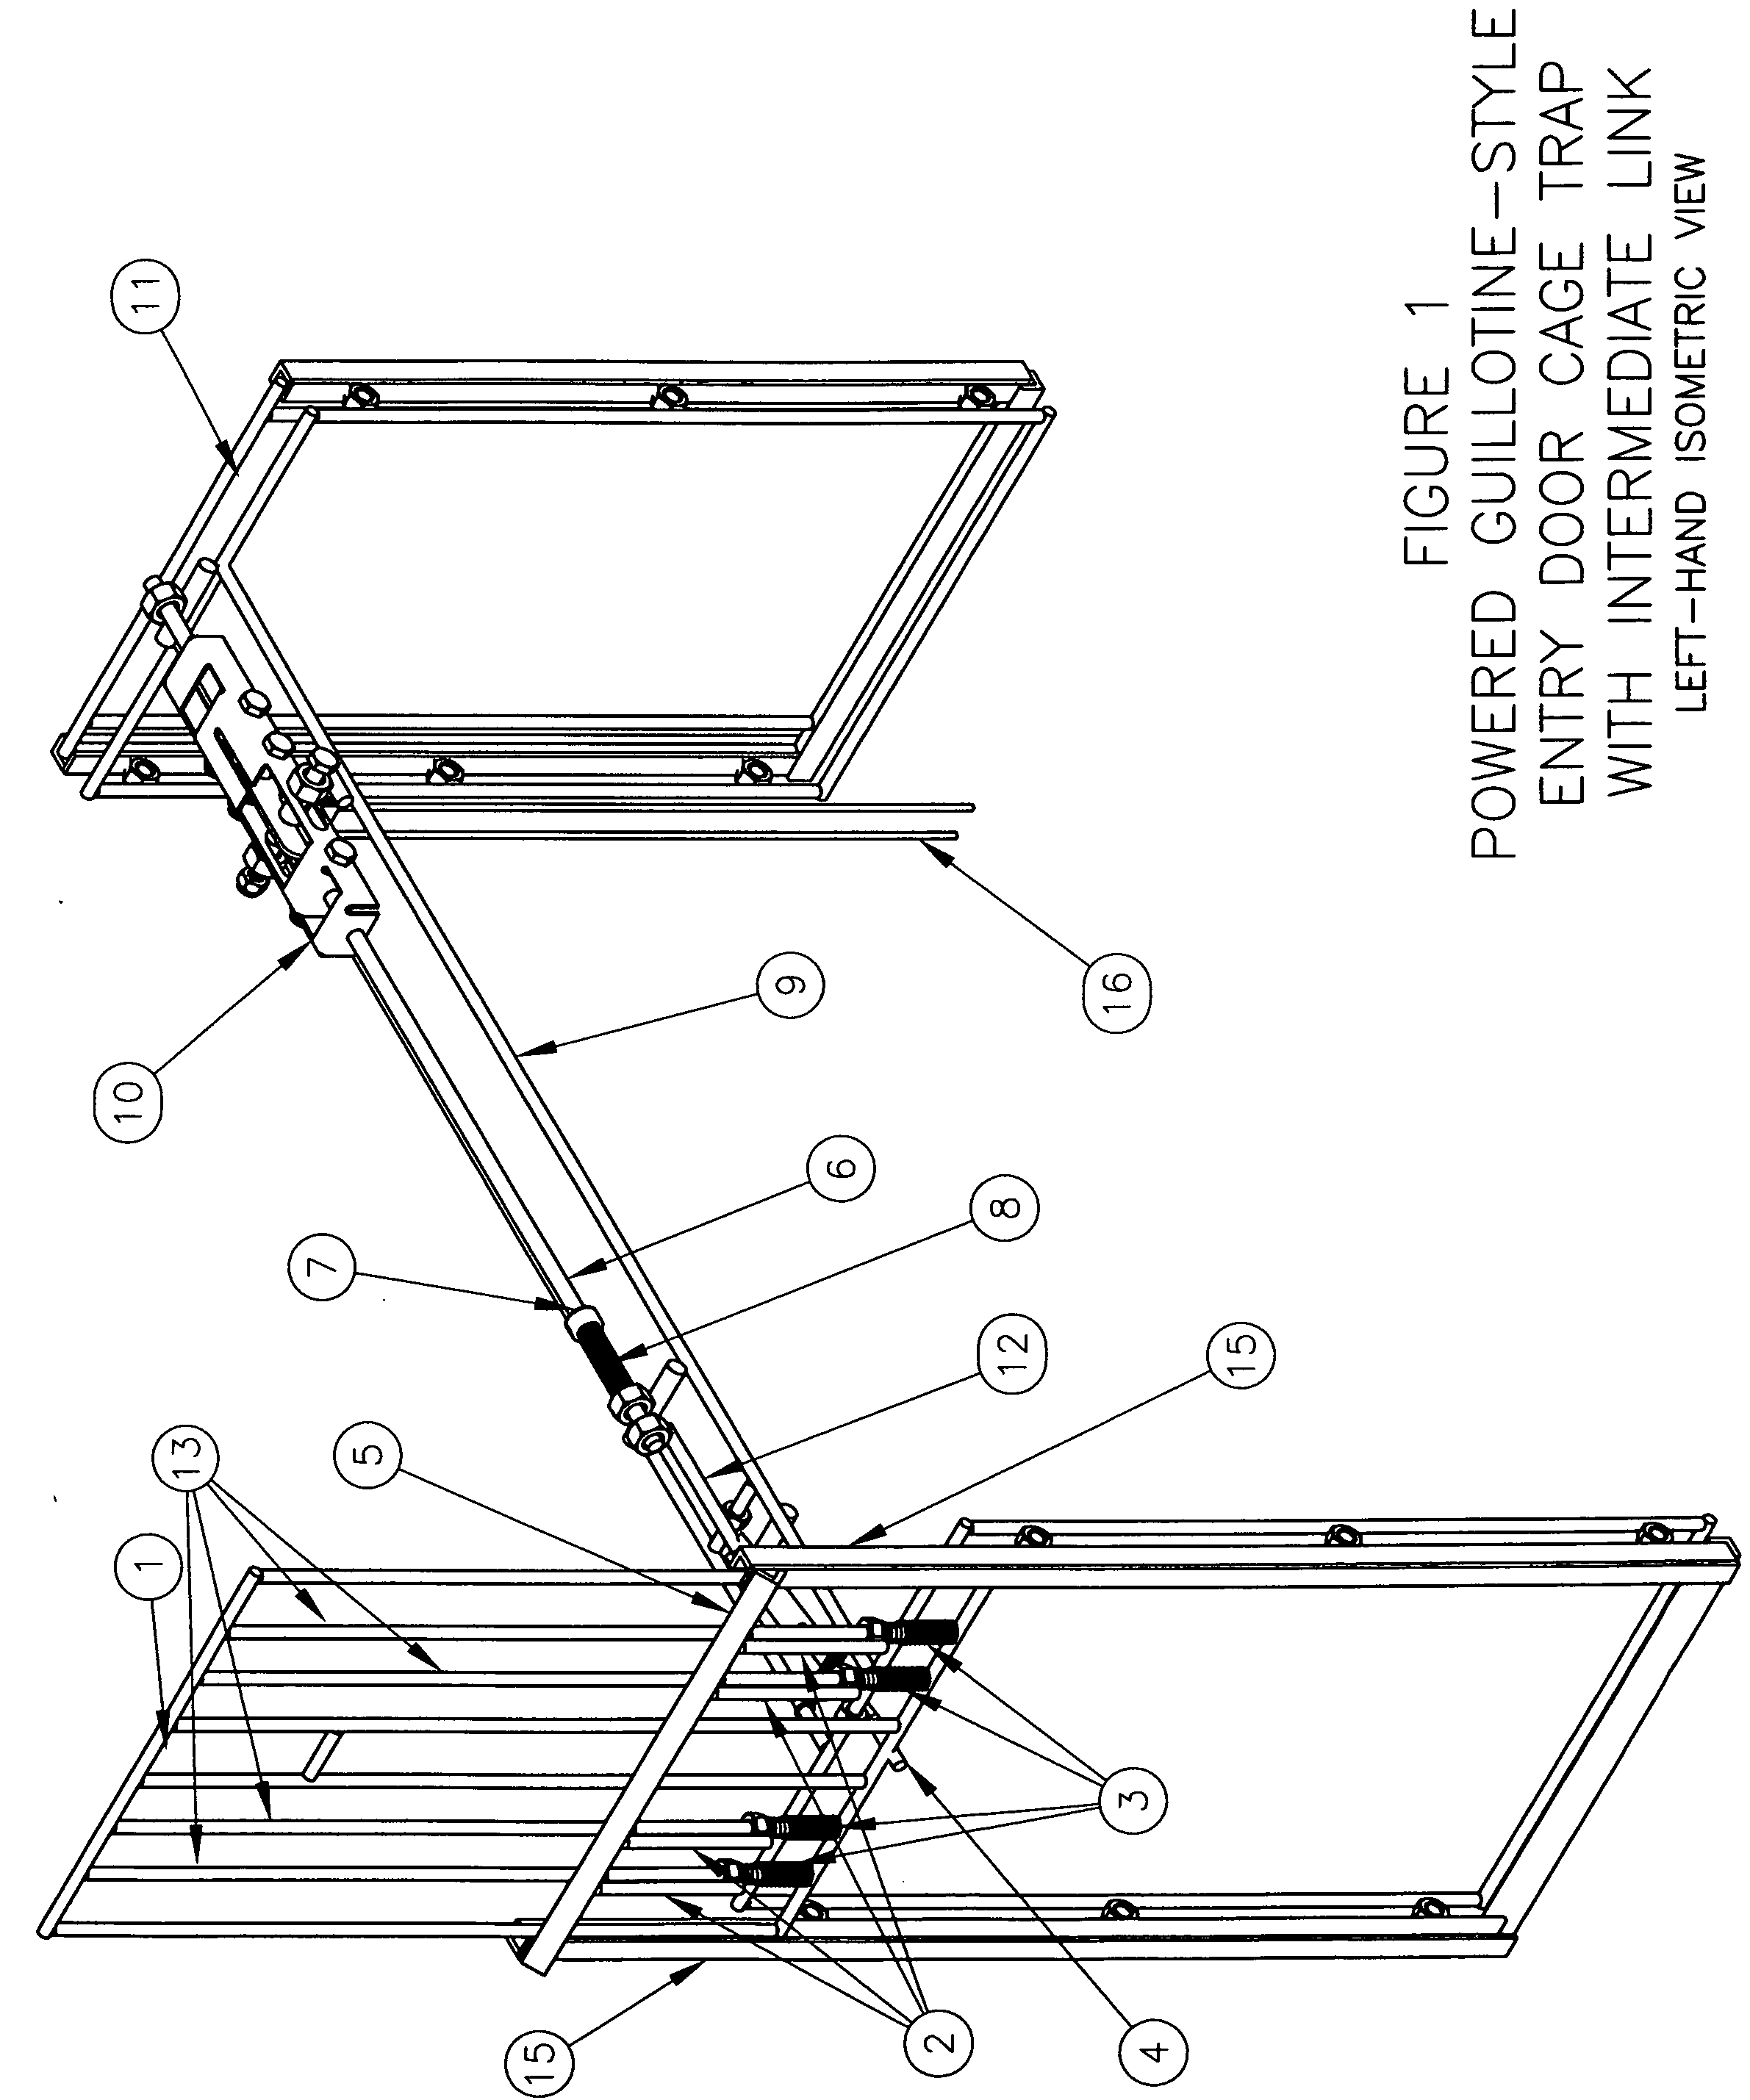 Advanced-powered sliding or guillotine door trap system for cage or corral-type animal traps